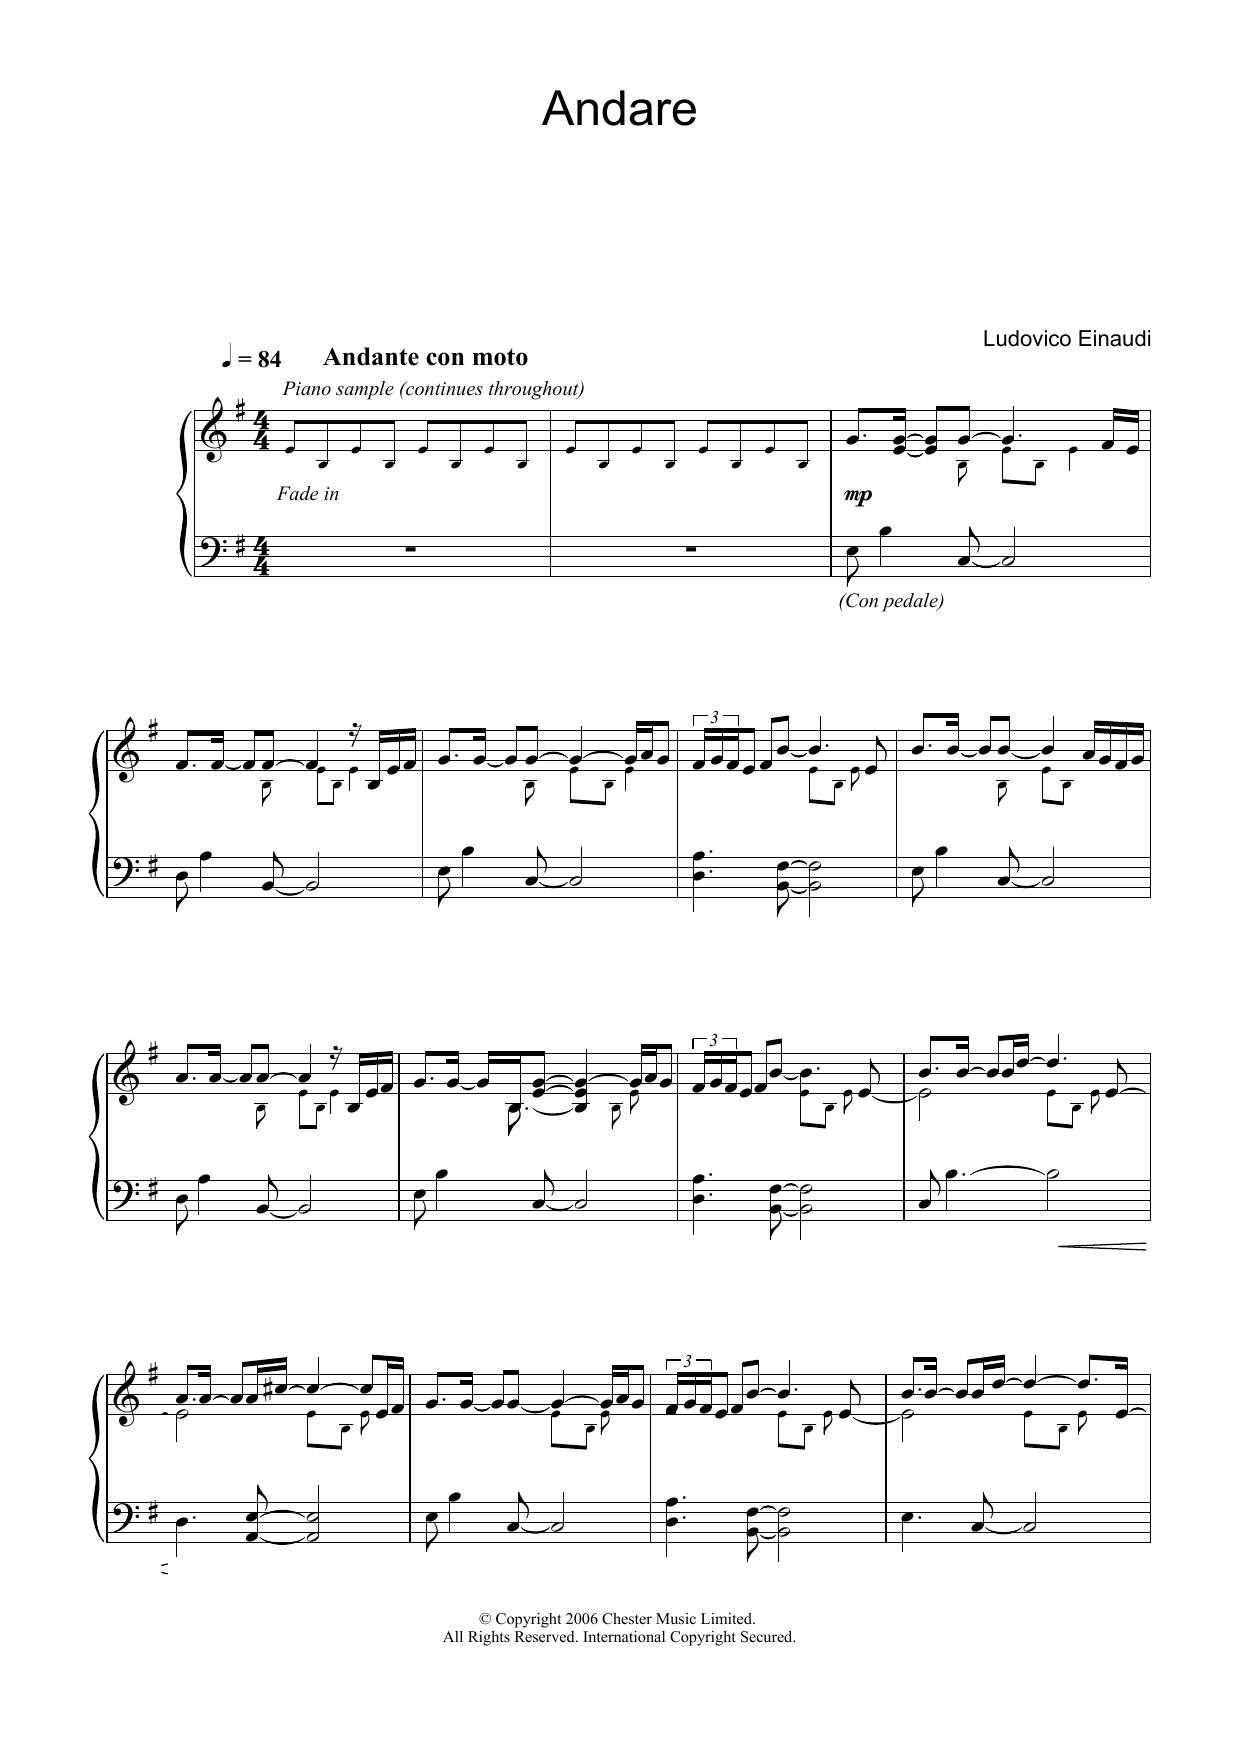 Ludovico Einaudi Andare sheet music notes and chords. Download Printable PDF.